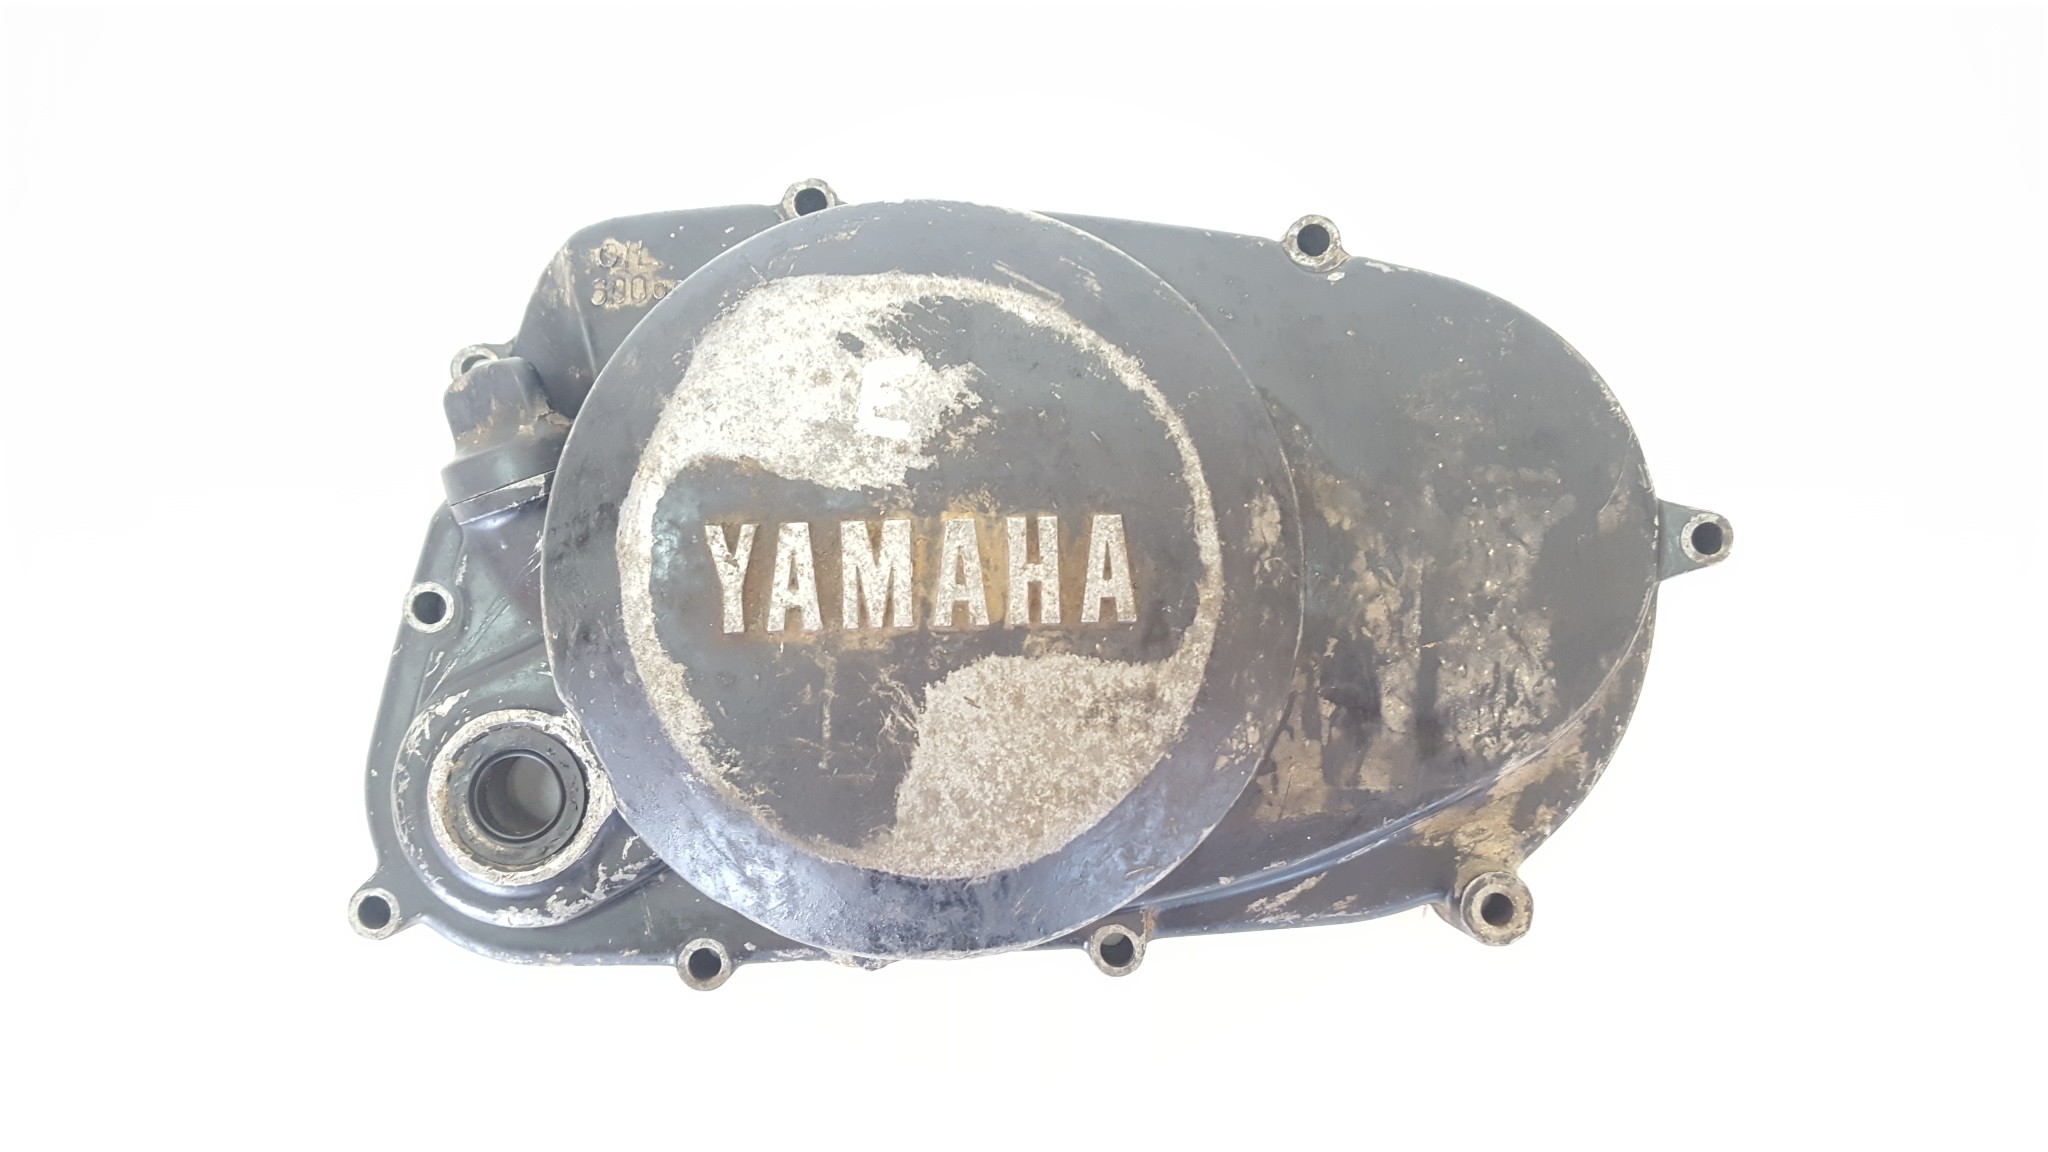 Clutch Right Crankcase Cover Yamaha YZ80 1978-1979 YZ 80